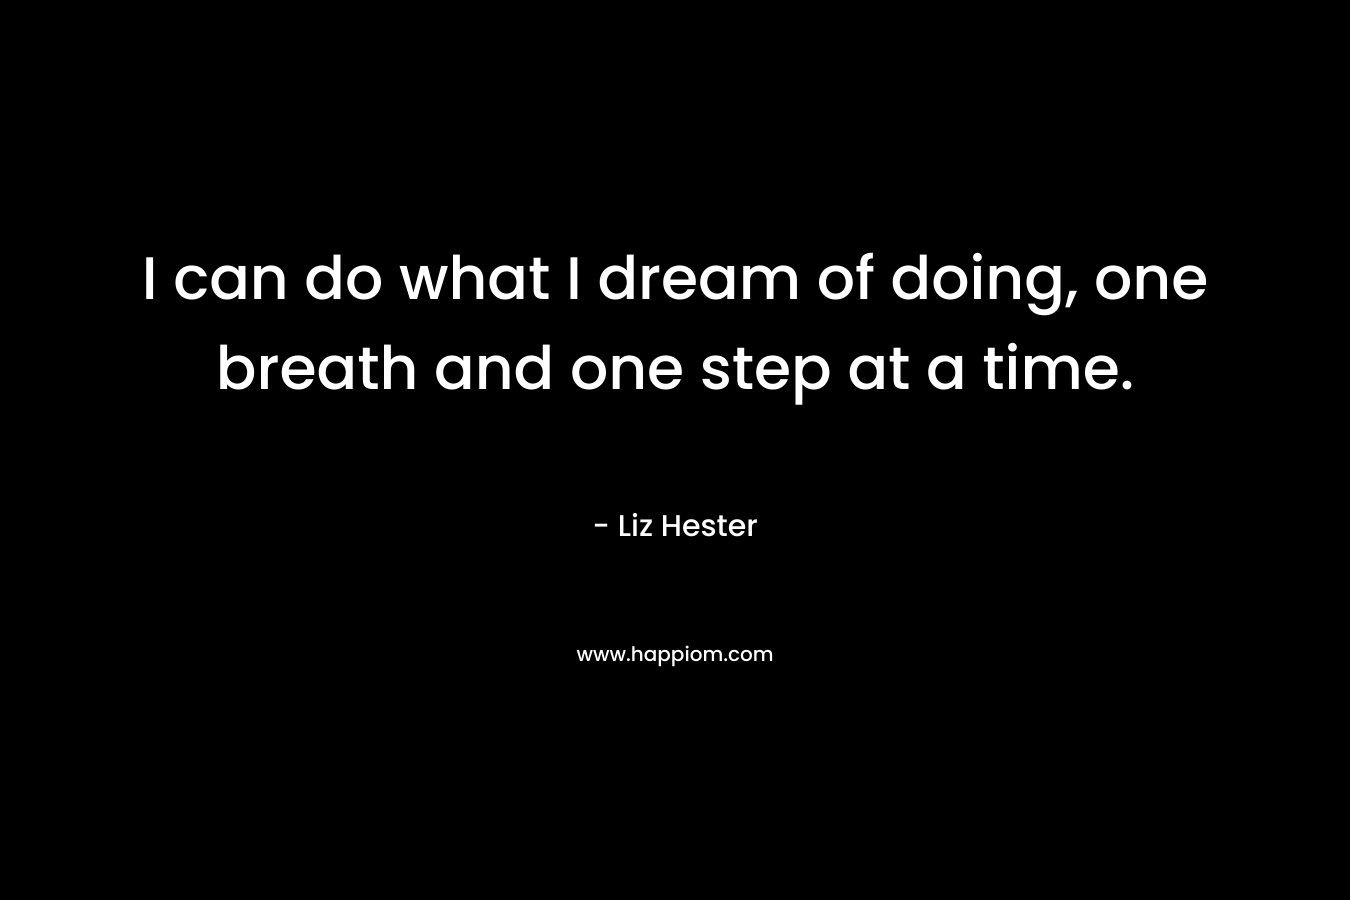 I can do what I dream of doing, one breath and one step at a time. – Liz Hester